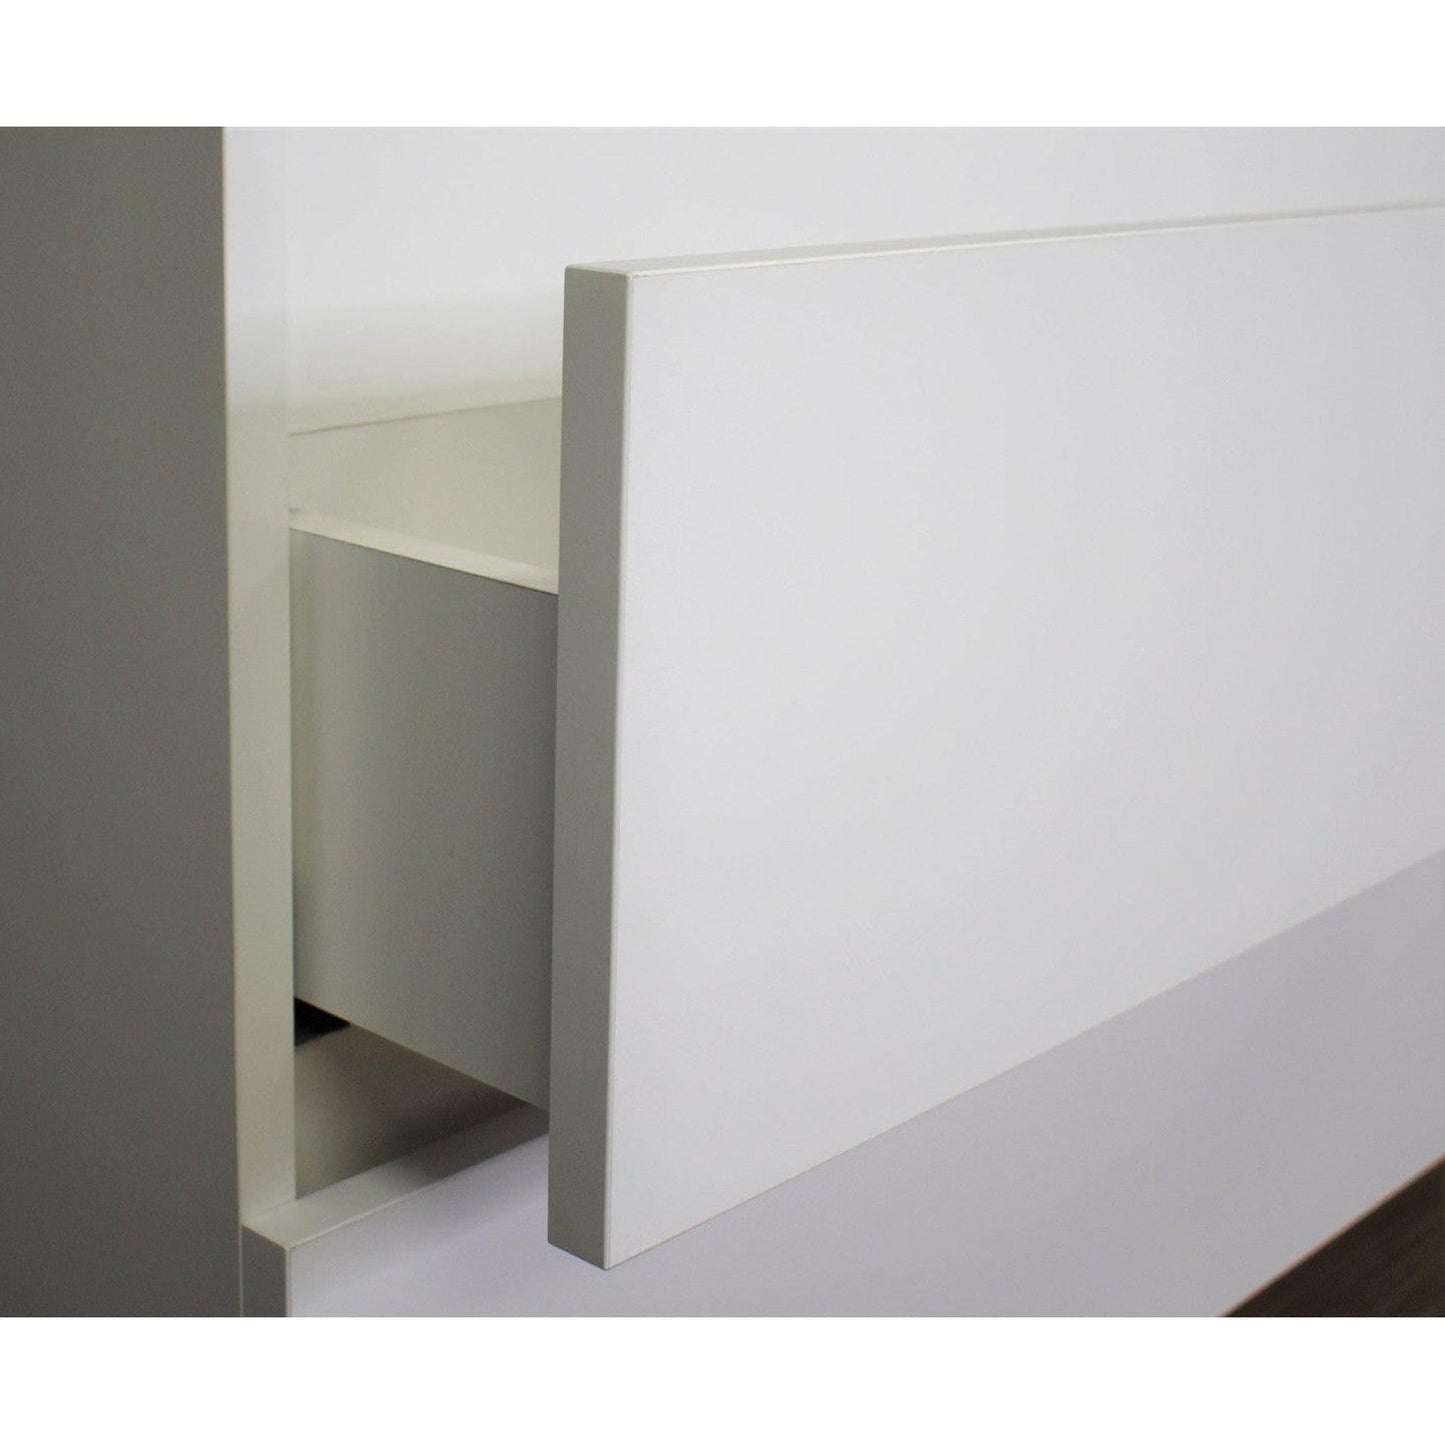 Volpa USA Salt 48" x 20" White Wall-Mounted Floating Bathroom Vanity Cabinet with Drawers